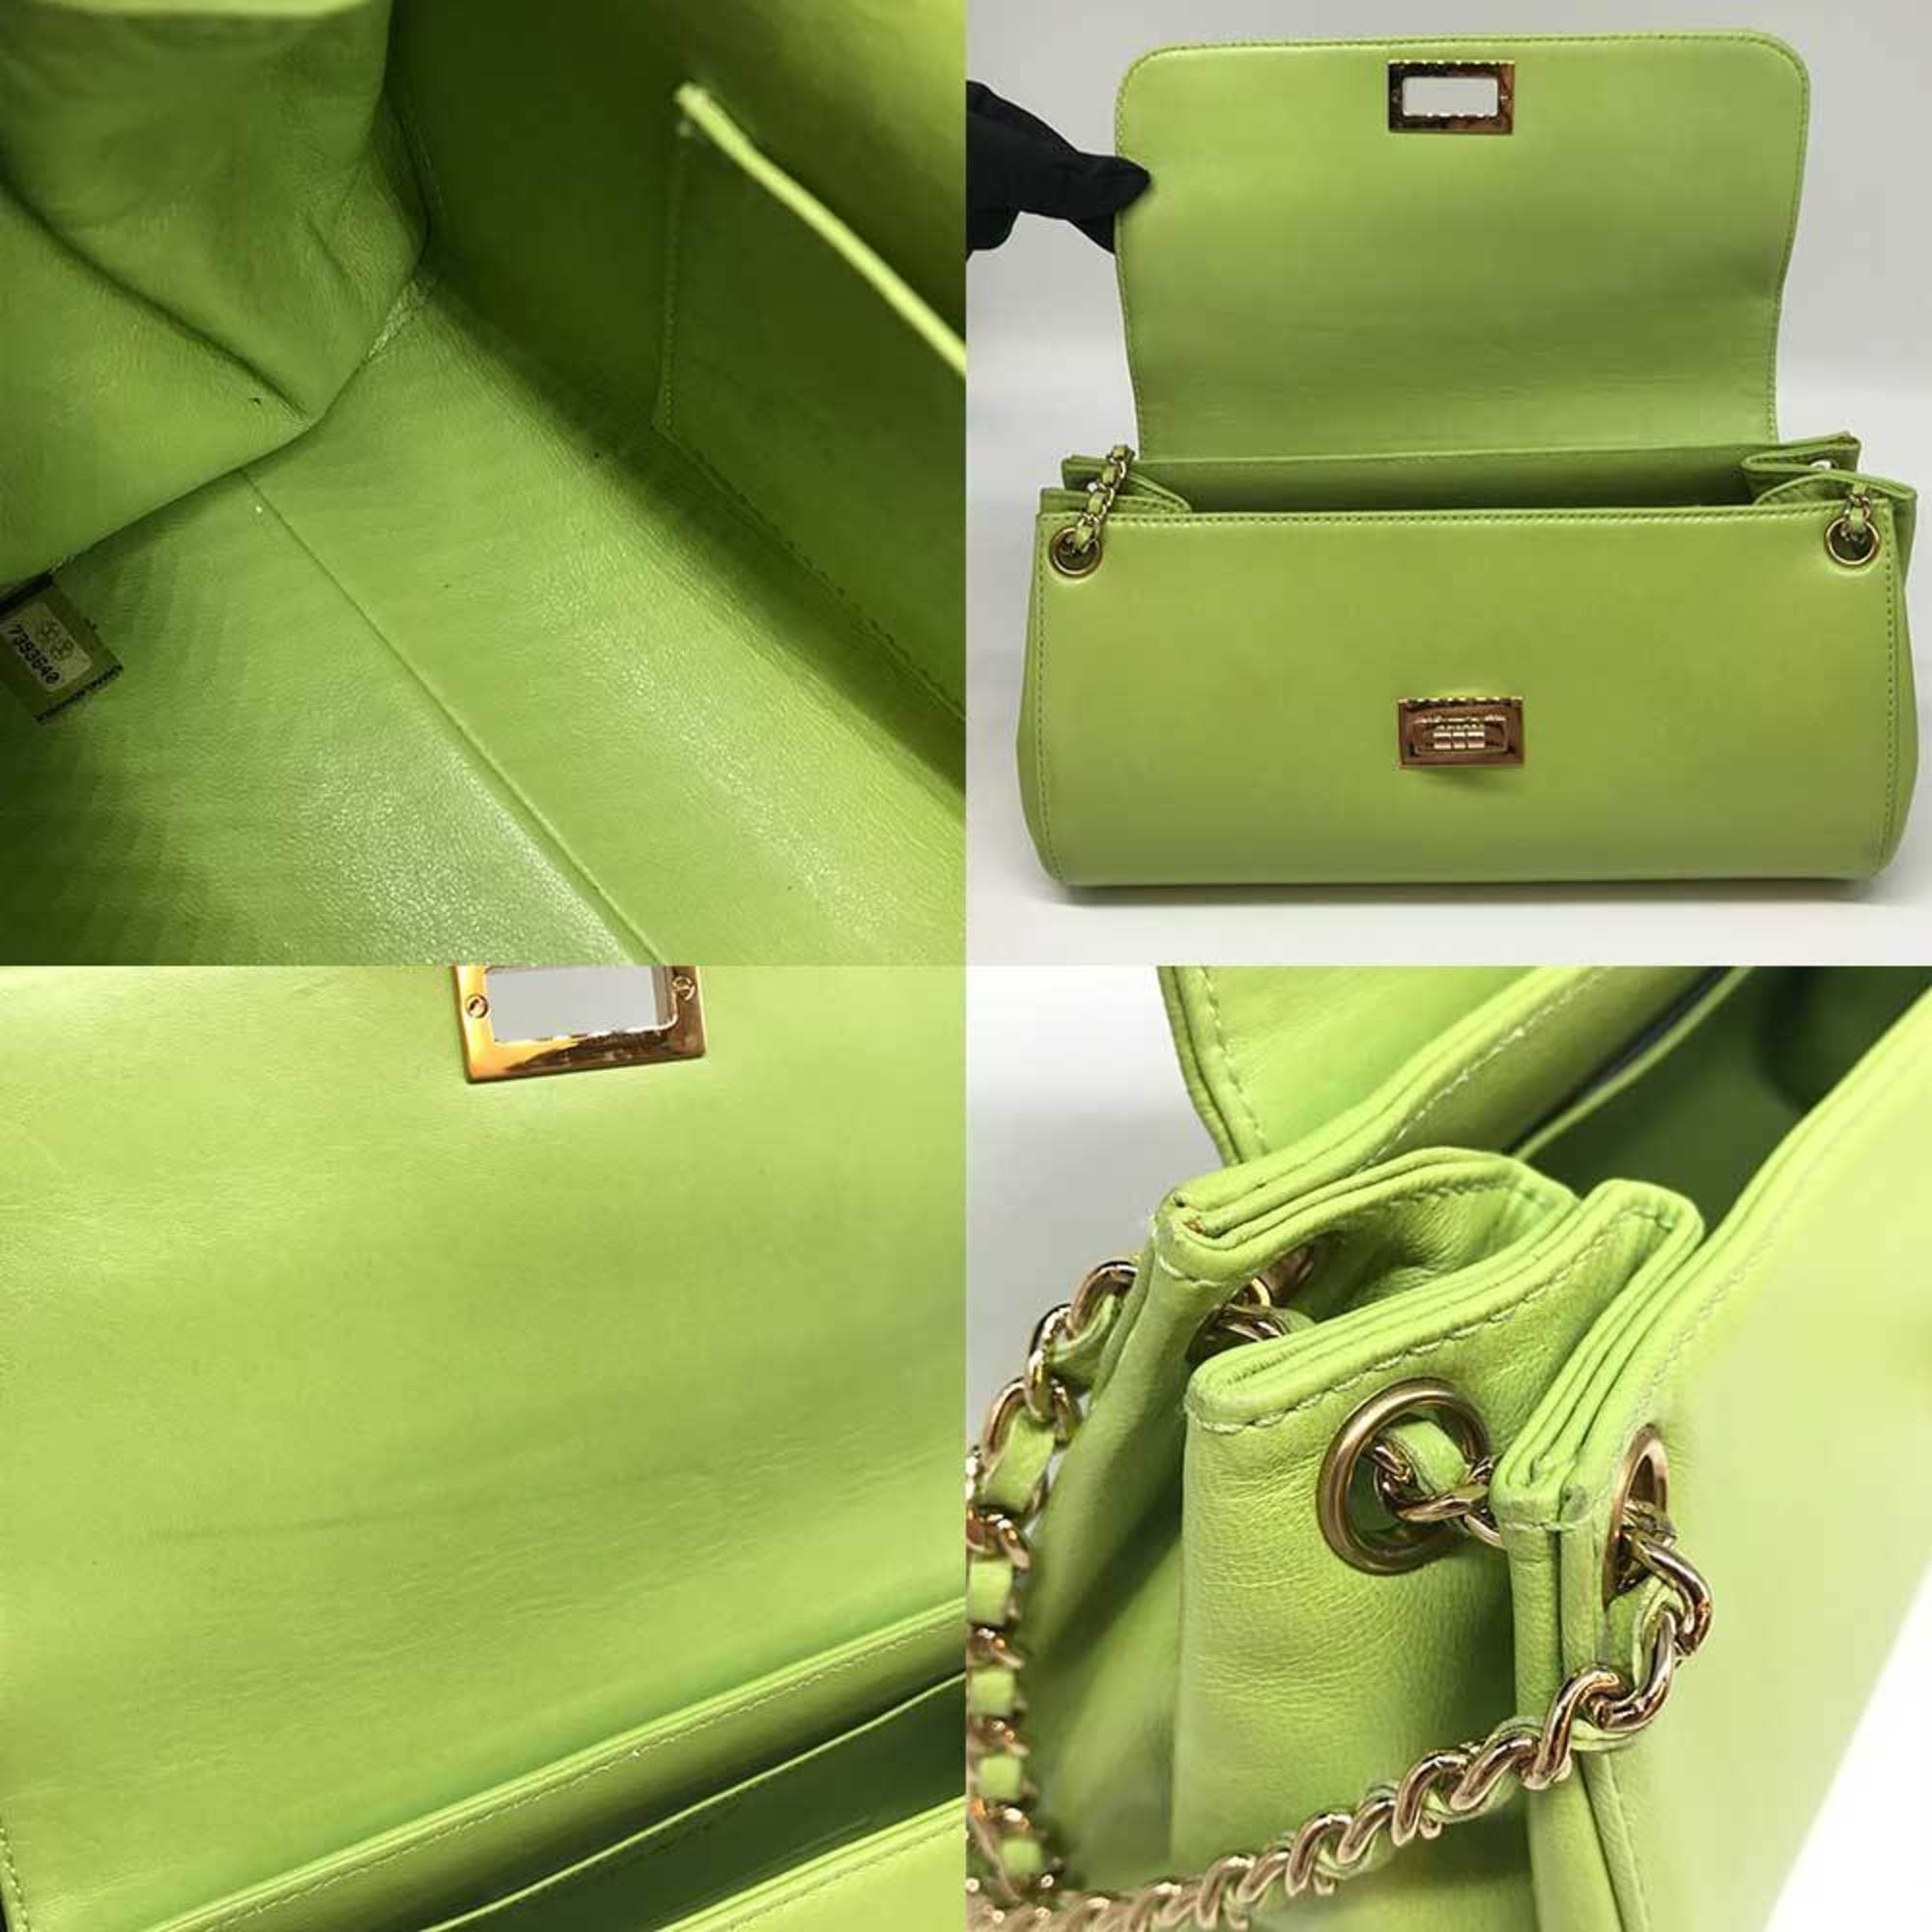 Chanel Chain Shoulder Bag Green Chocolate Bar Leather CHANEL